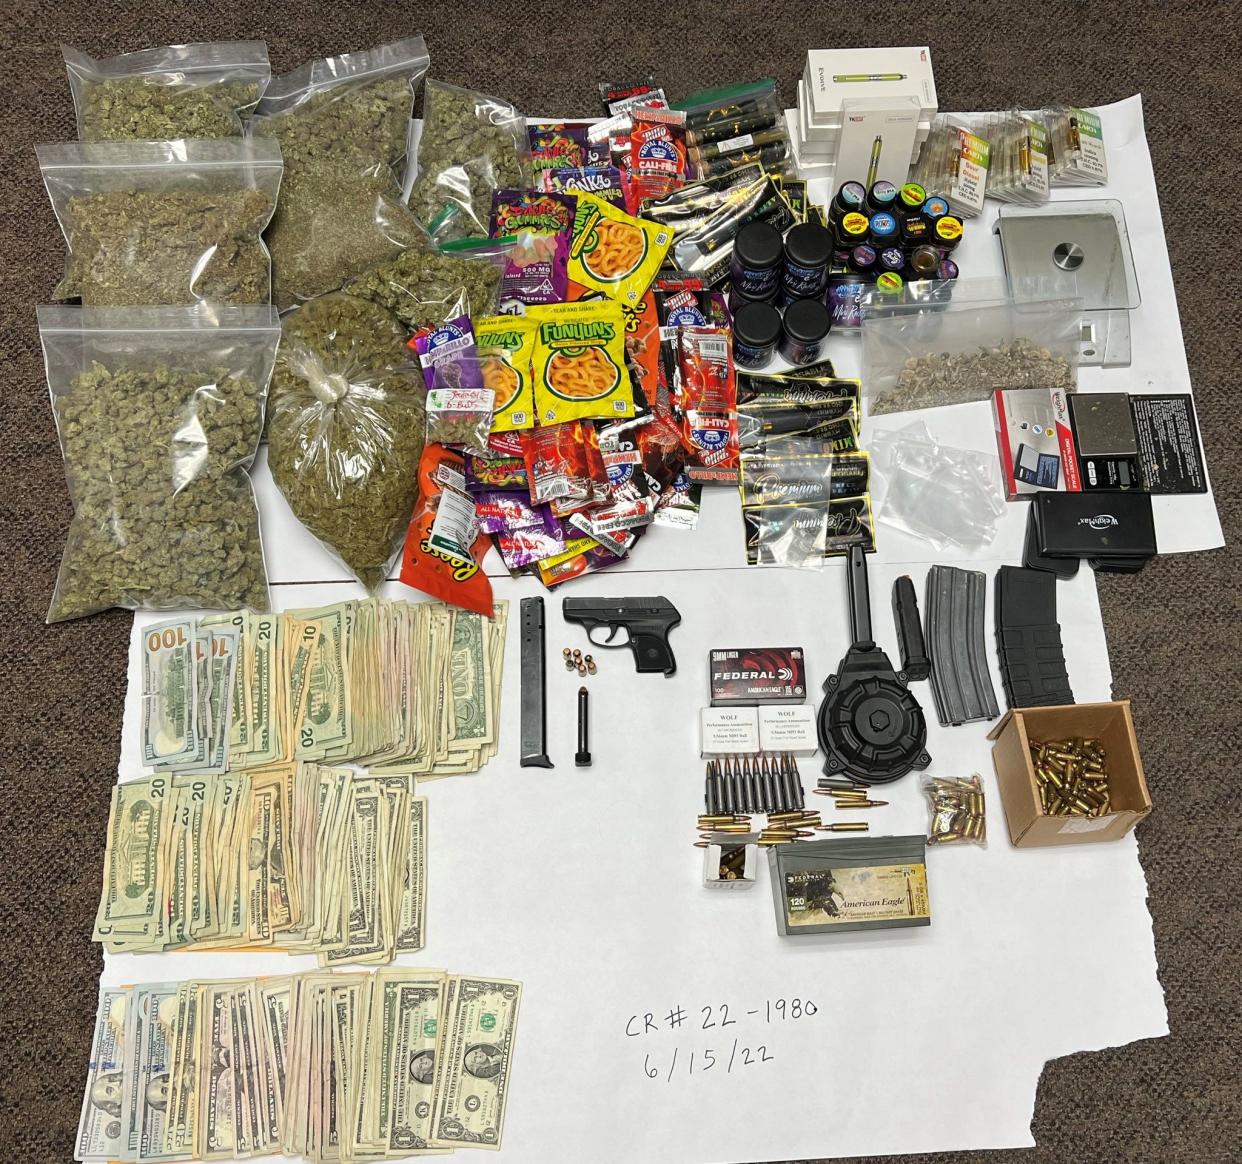 Three suspects were arrested by Barstow Police who during an investigation found illegal drugs, magic mushrooms and weapons.